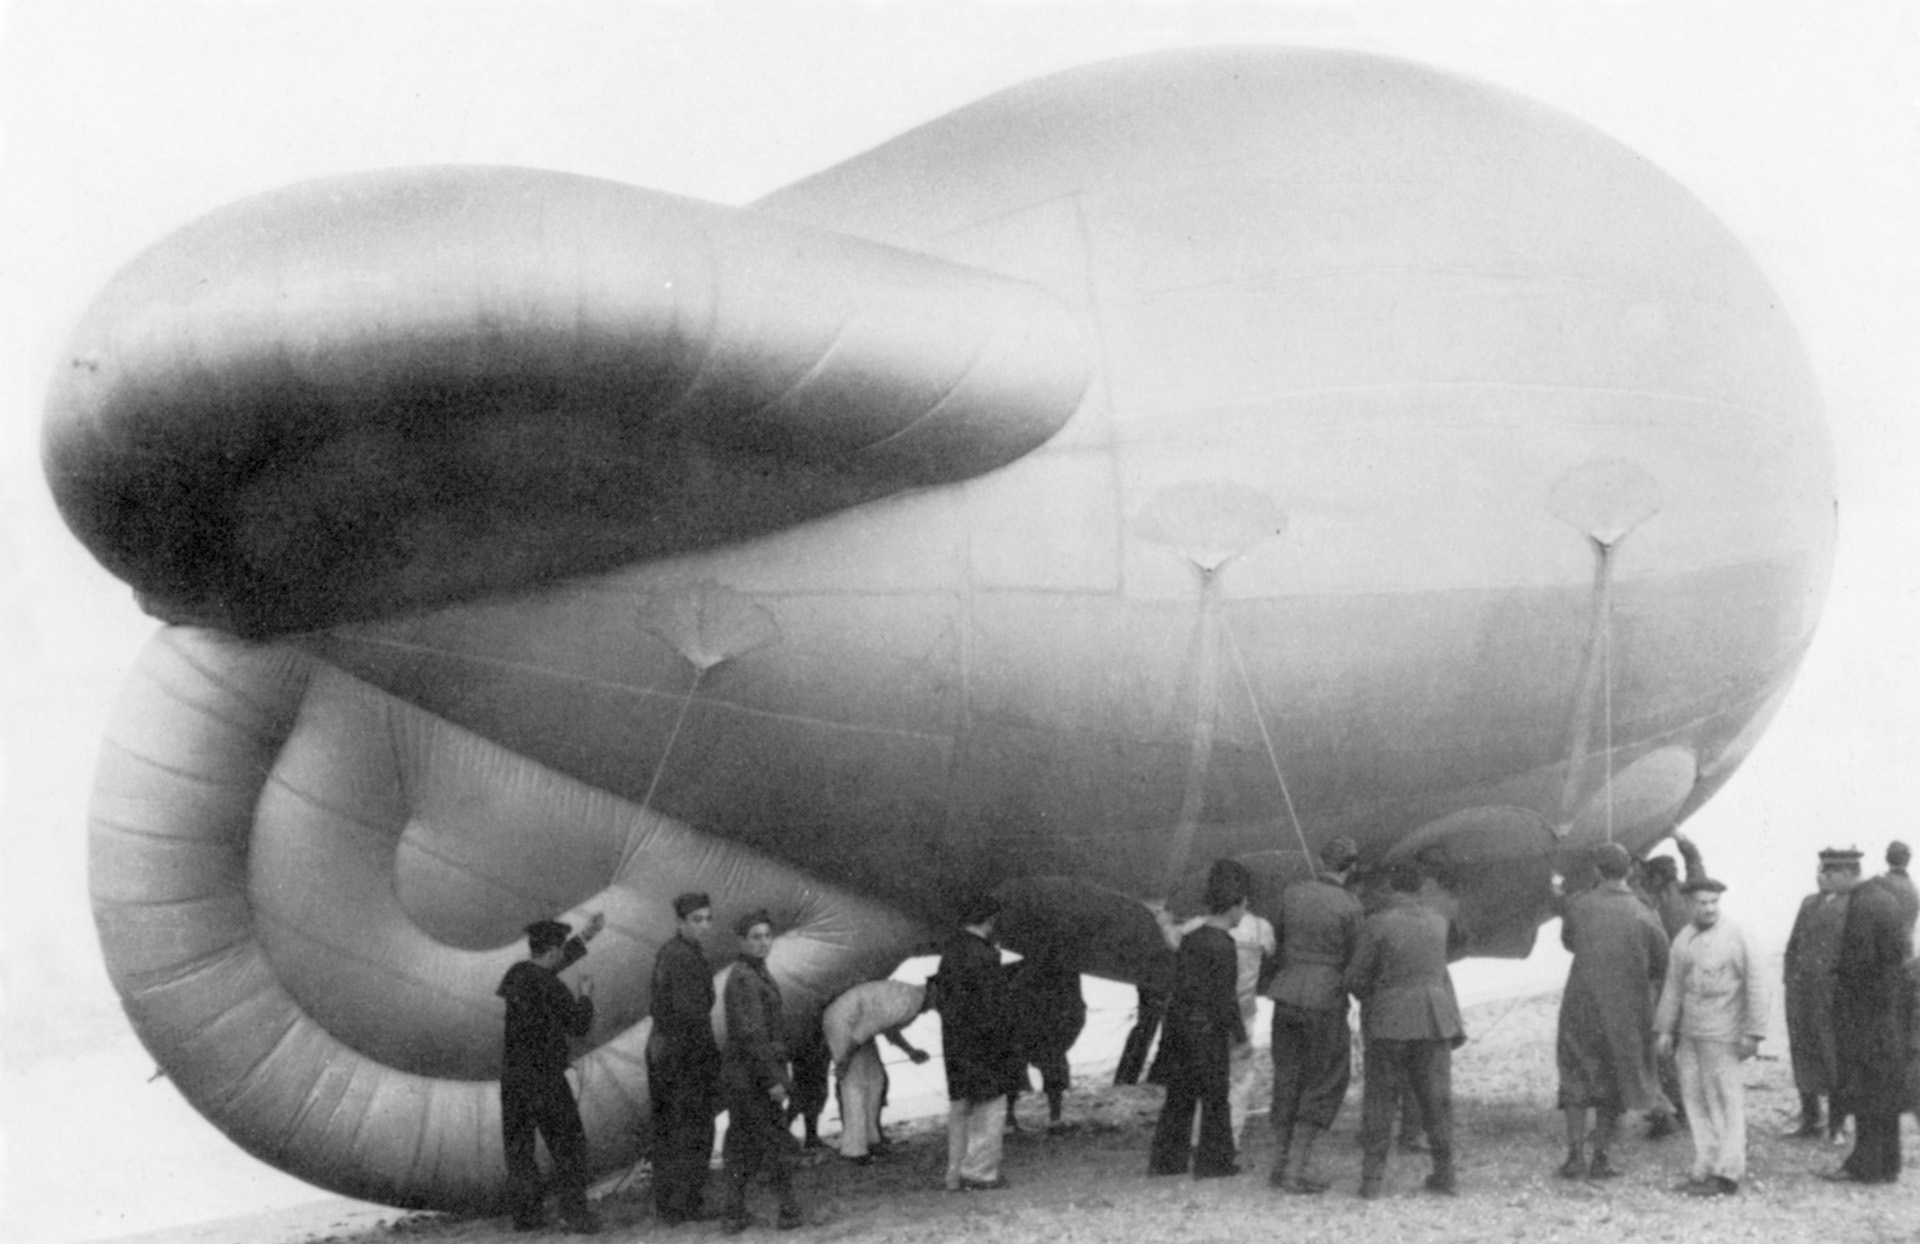 Italians raised barge balloons as obstacles to airplanes.